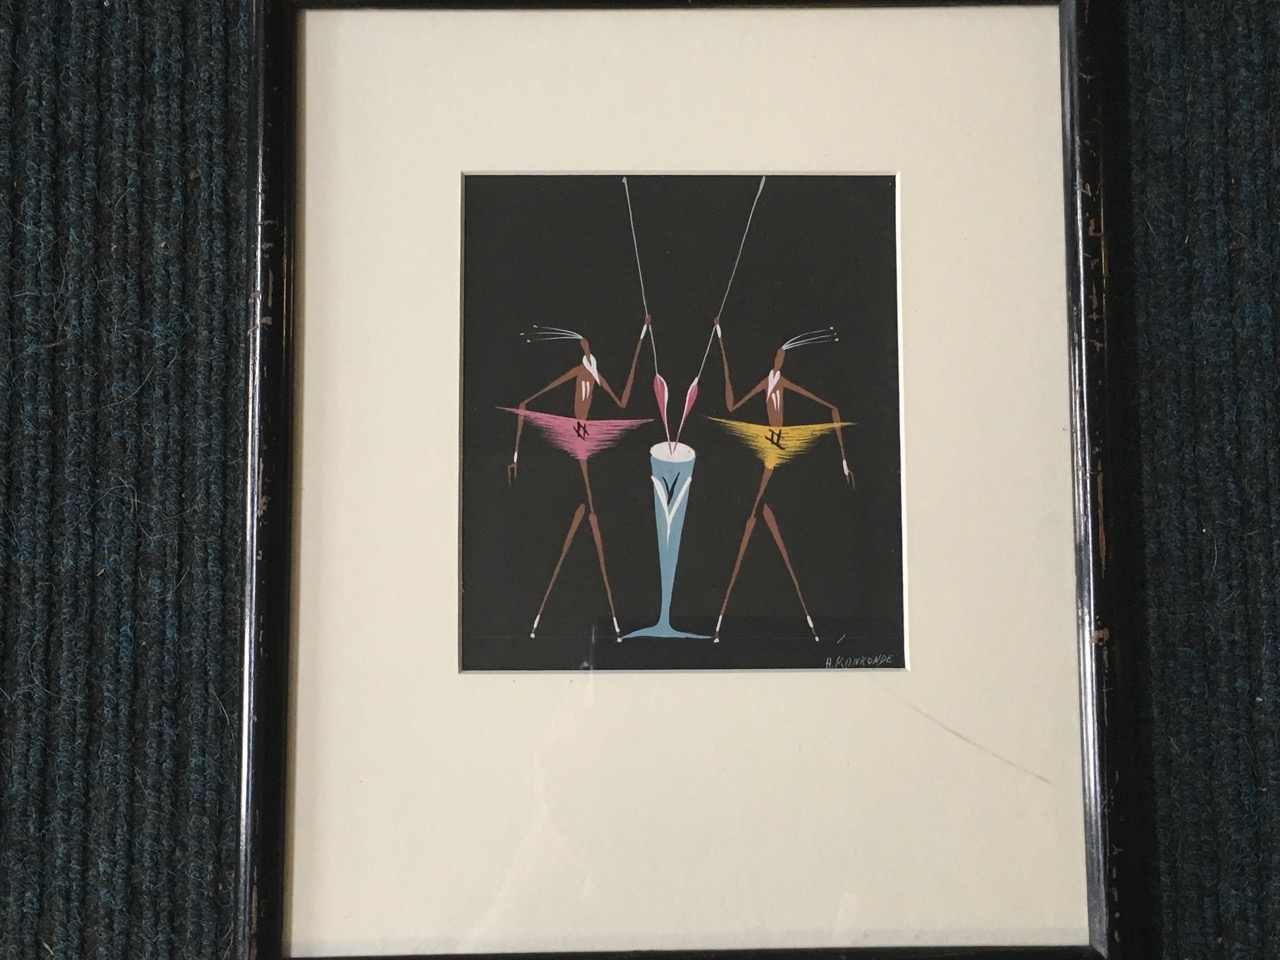 Oil on black paper, a pair, Congolese school tribal studies of figures with spears, signed A - Image 5 of 6